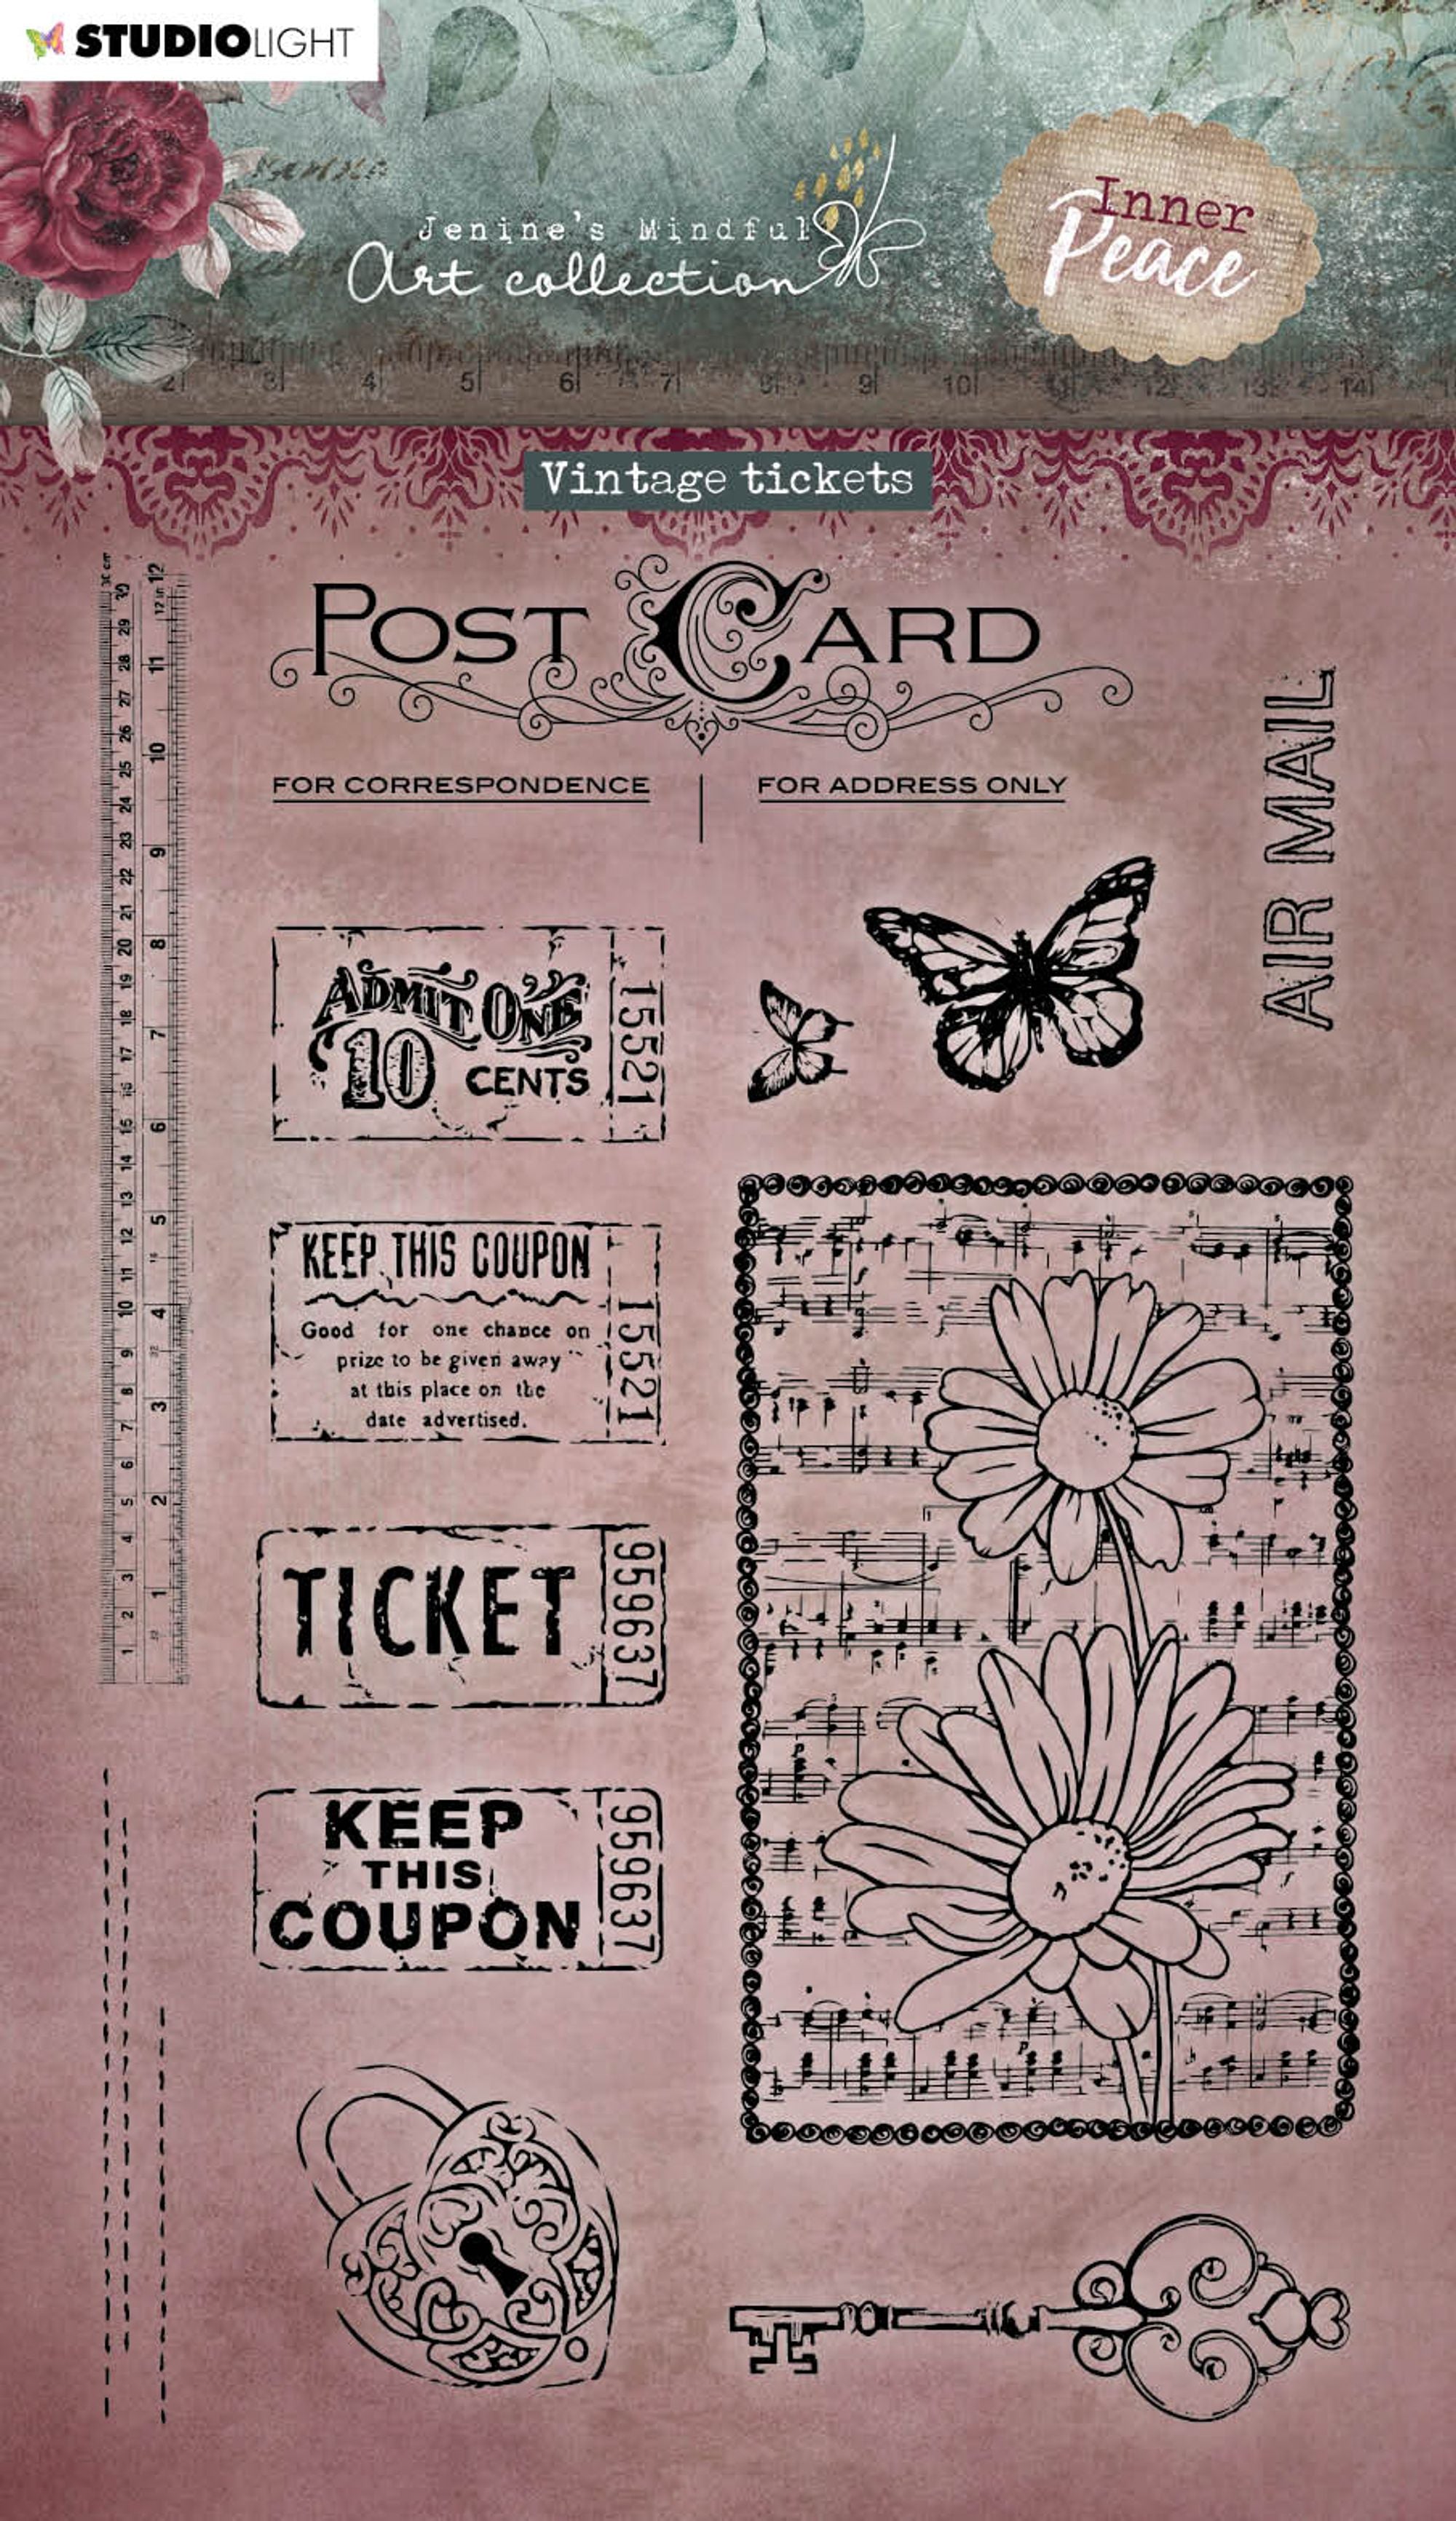 JMA Clear Stamp Vintage Tickets Inner Peace 148x210x3mm 13 PC nr.277